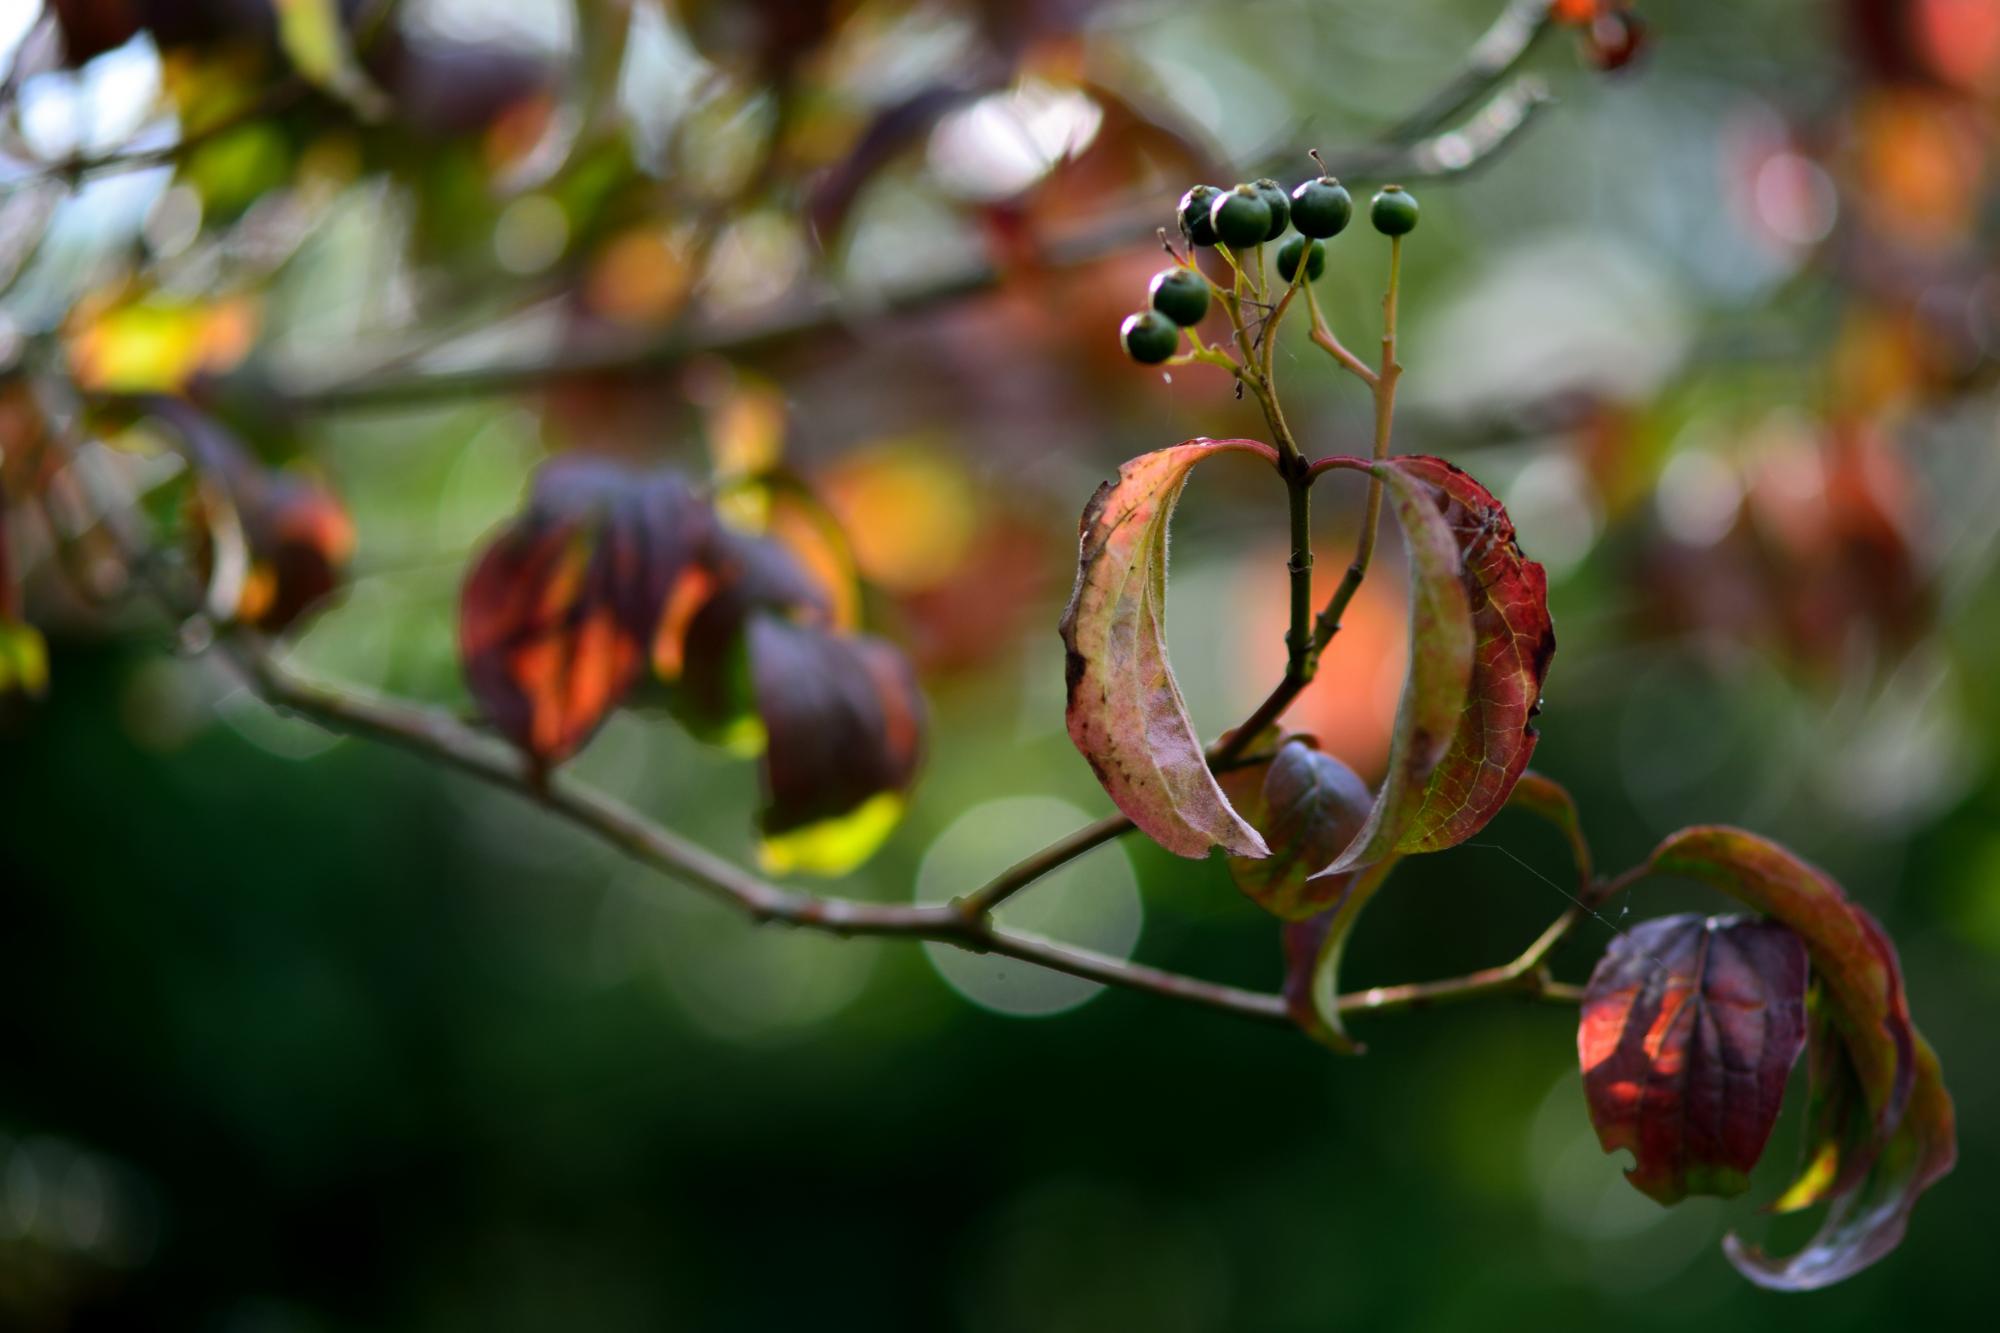 Close up of a dogwood branch with autumn leaves and a cluster of small black berries